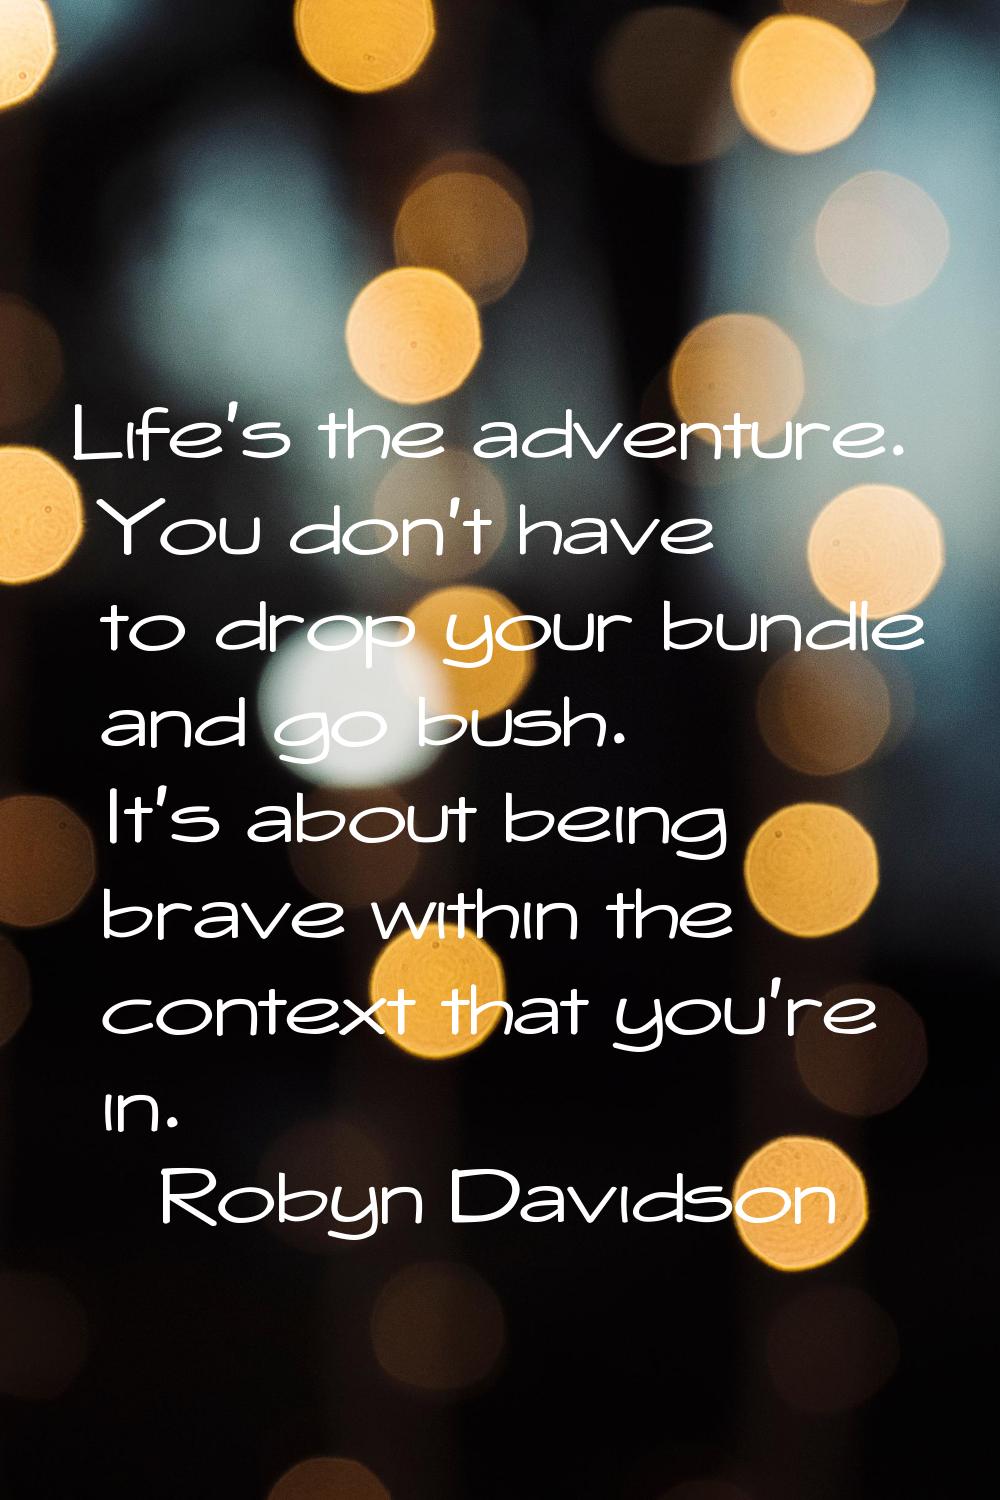 Life's the adventure. You don't have to drop your bundle and go bush. It's about being brave within